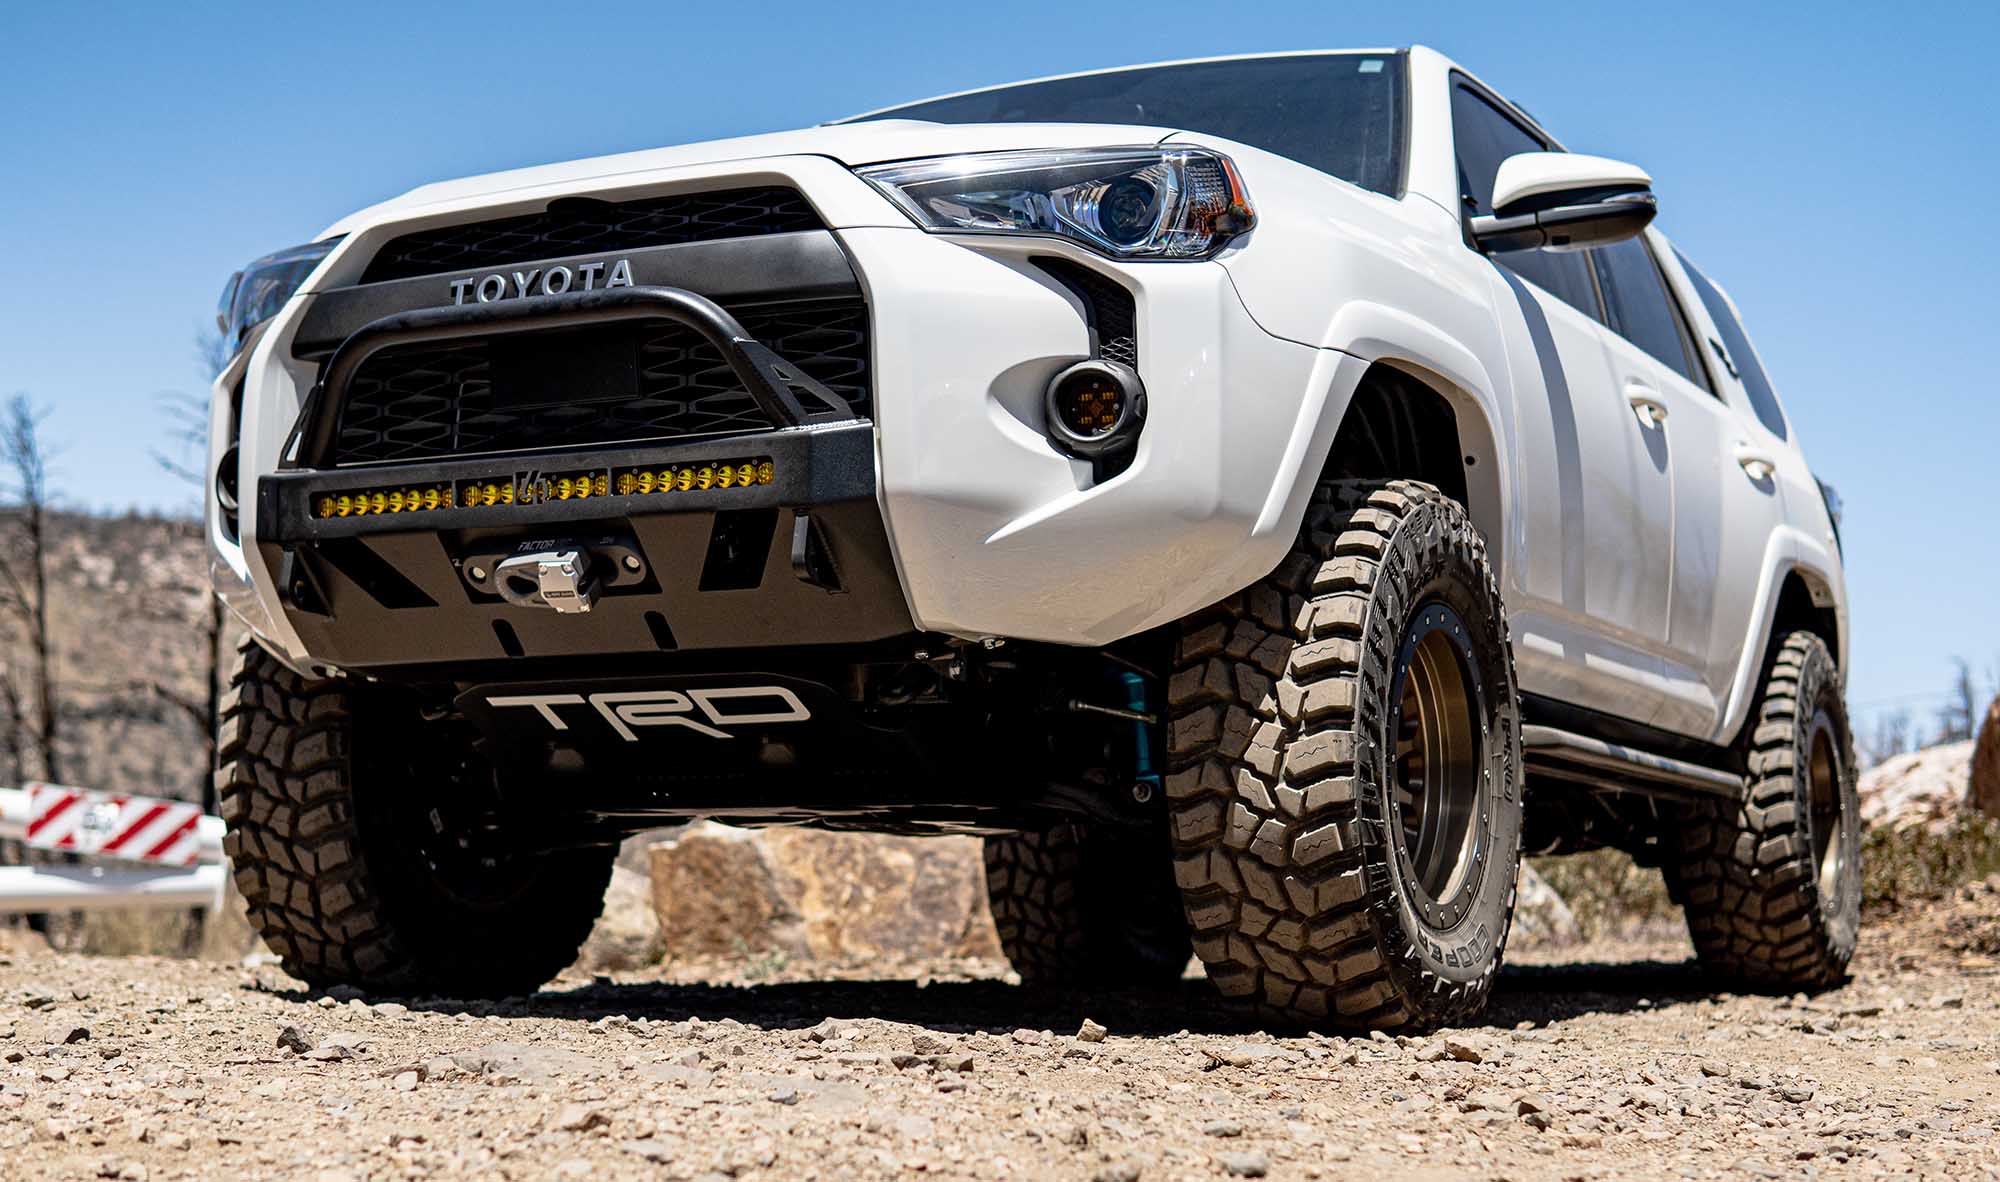 4WD Crew | Shop for your 5th Gen Toyota 4Runner Gear & Accessories